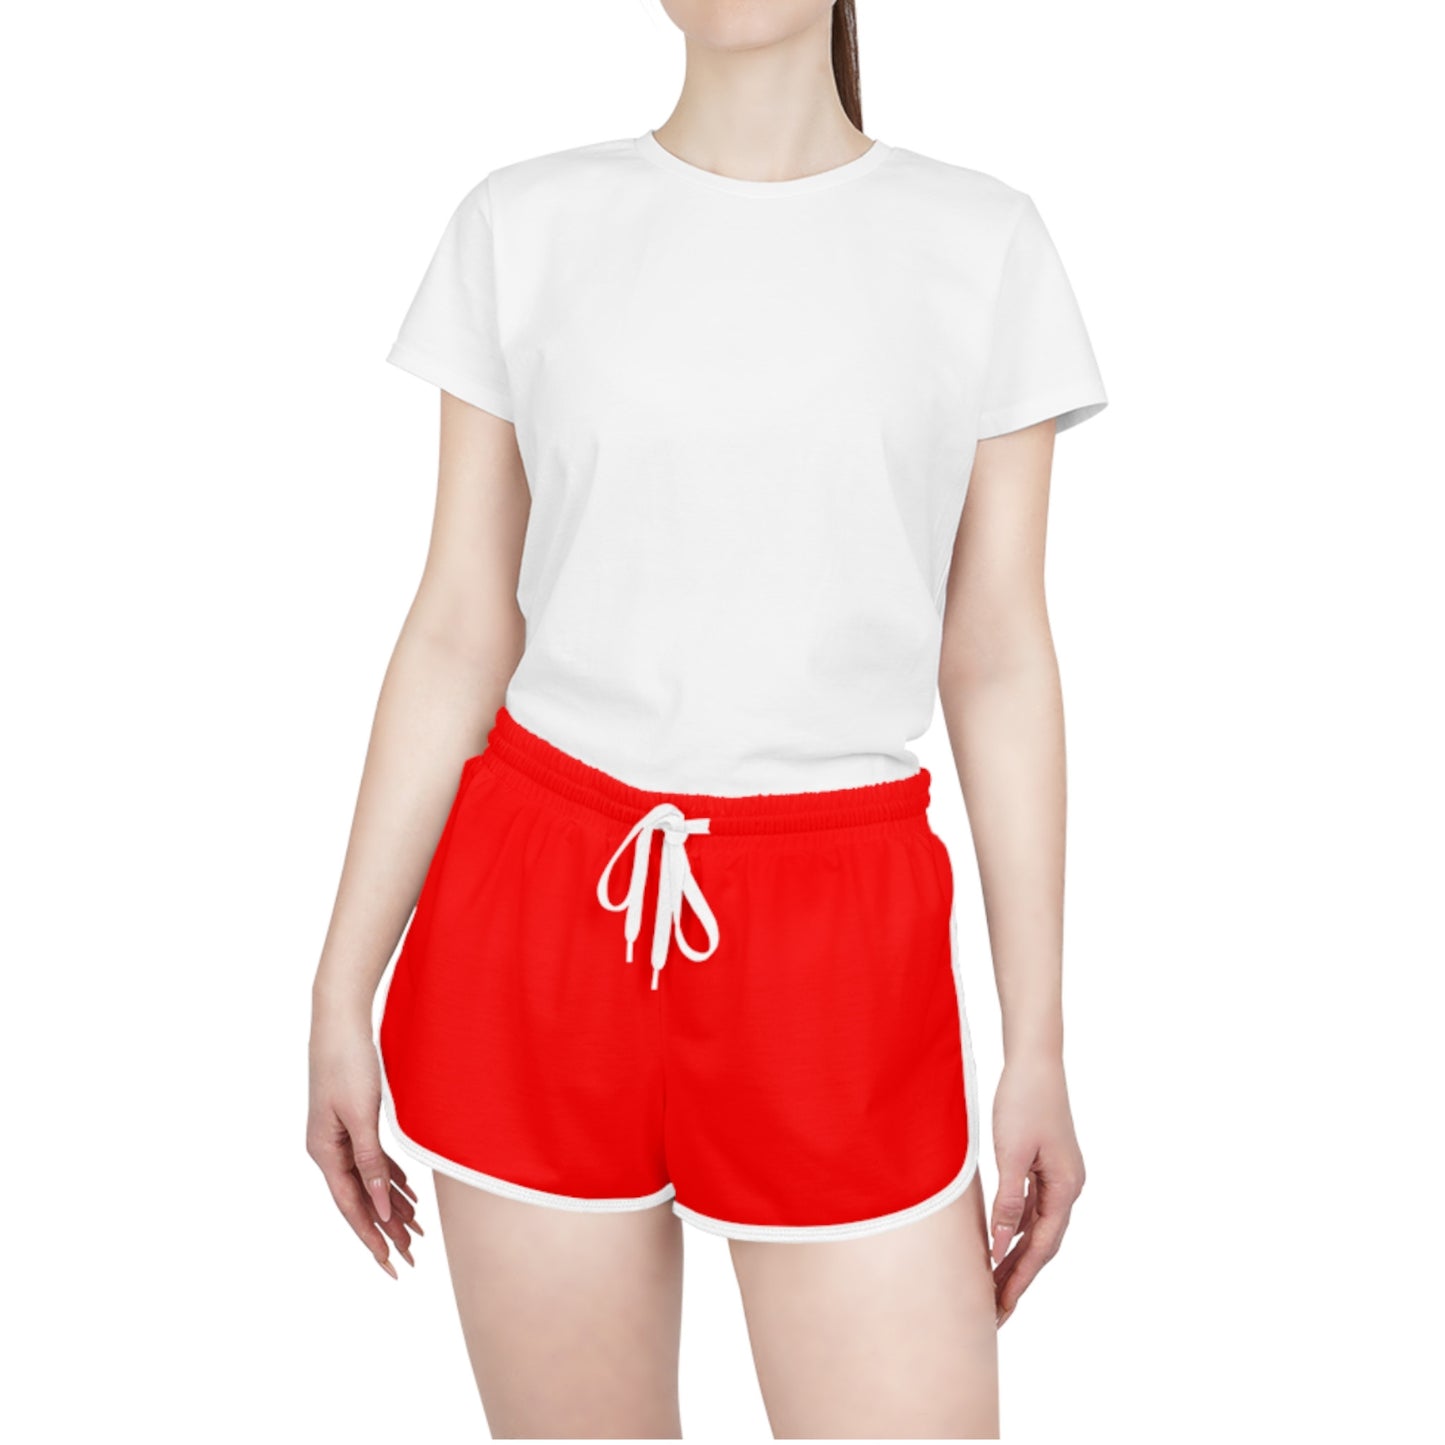 Red Women's Relaxed Shorts